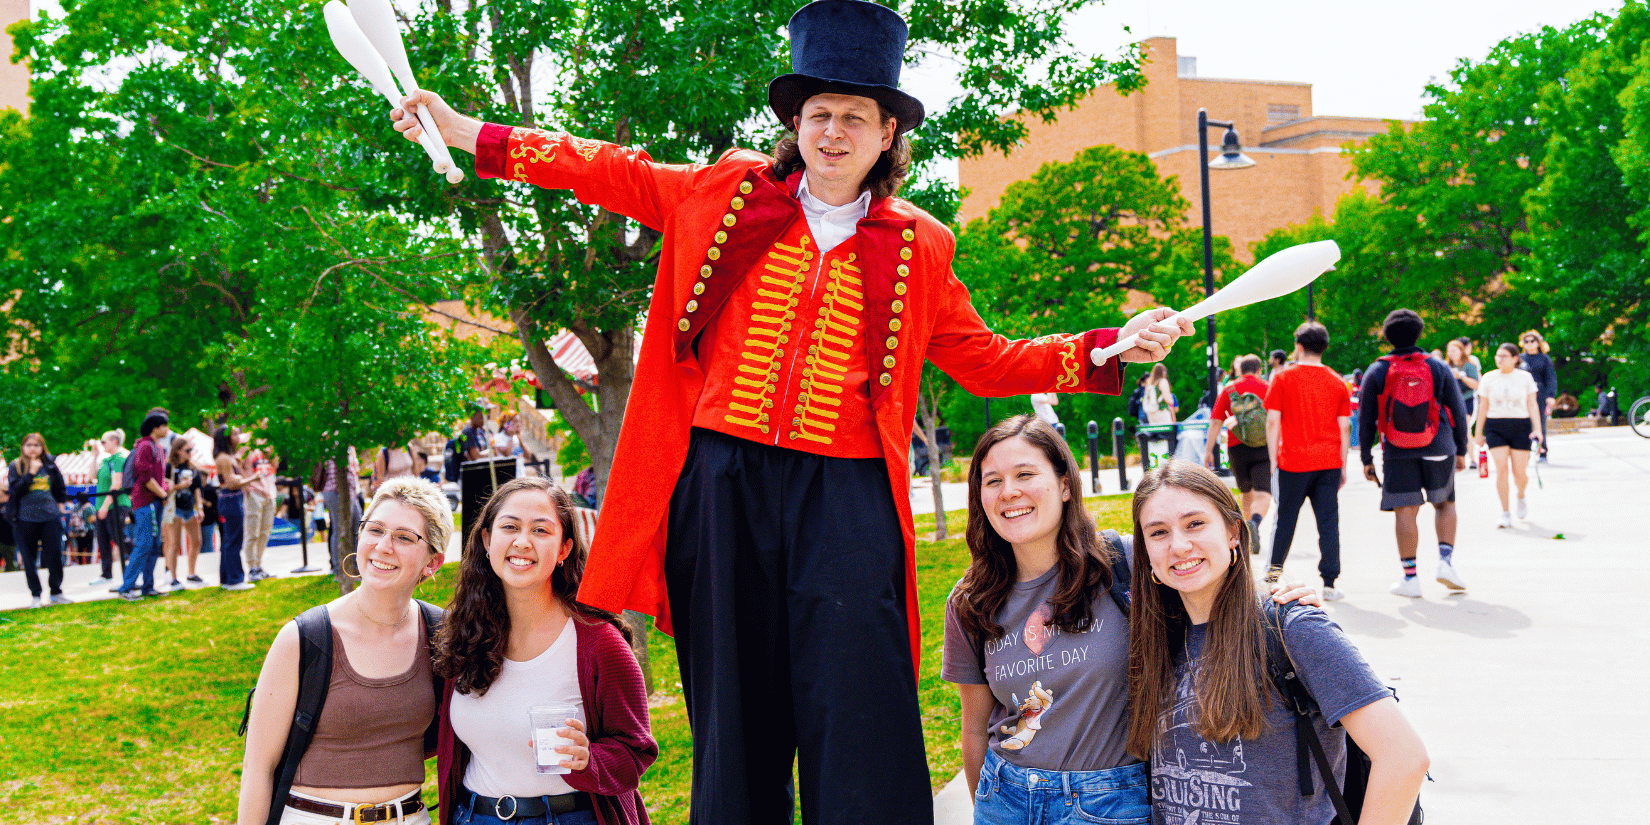 tall carnival man next to 4 students